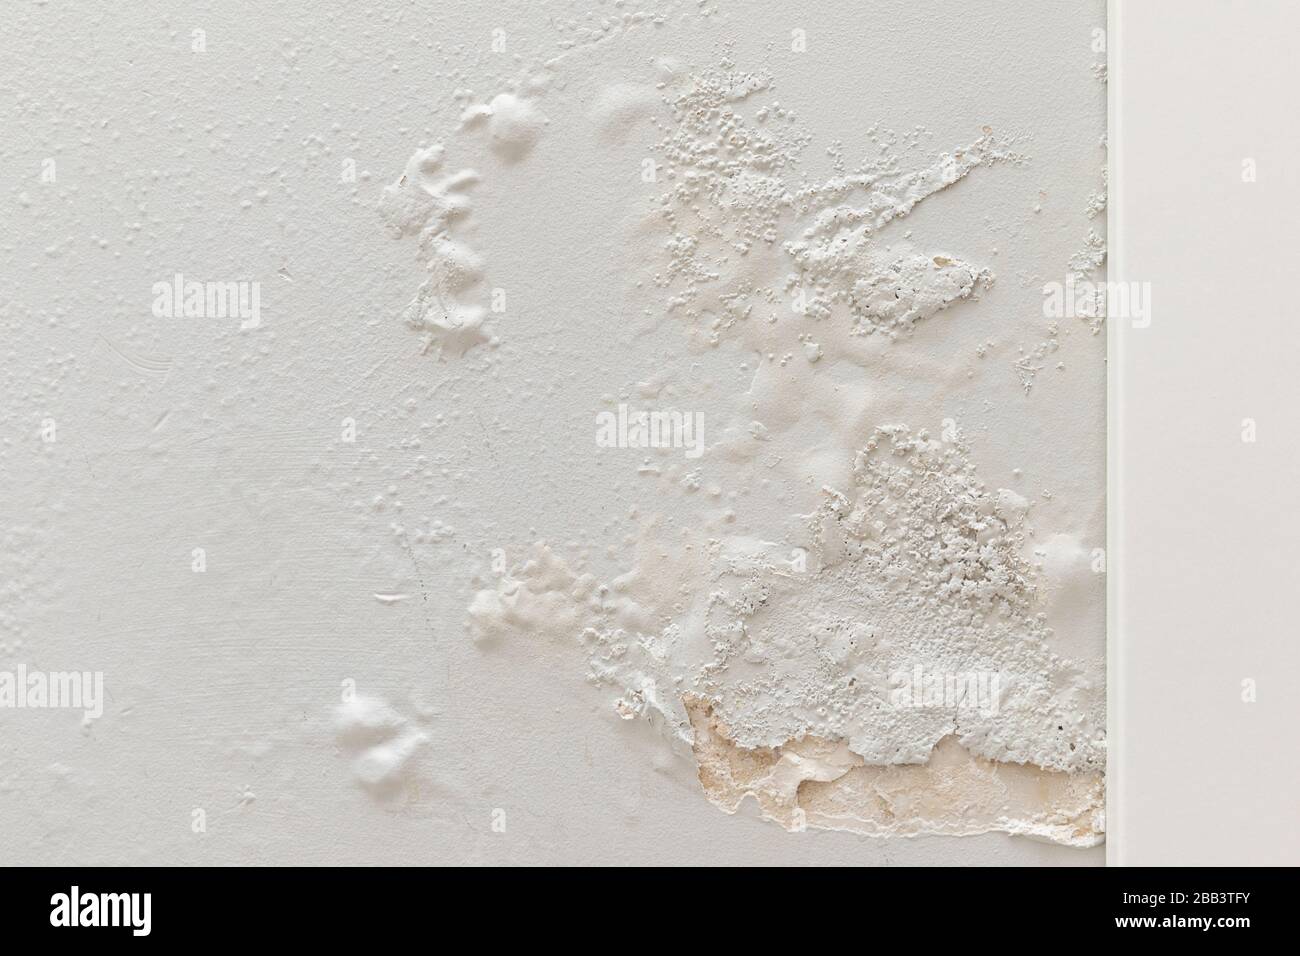 Fungus on the wall in a freshly renovated apartment. Poor waterproofing. Problem in rainy, it's moisture on the wall. Stock Photo